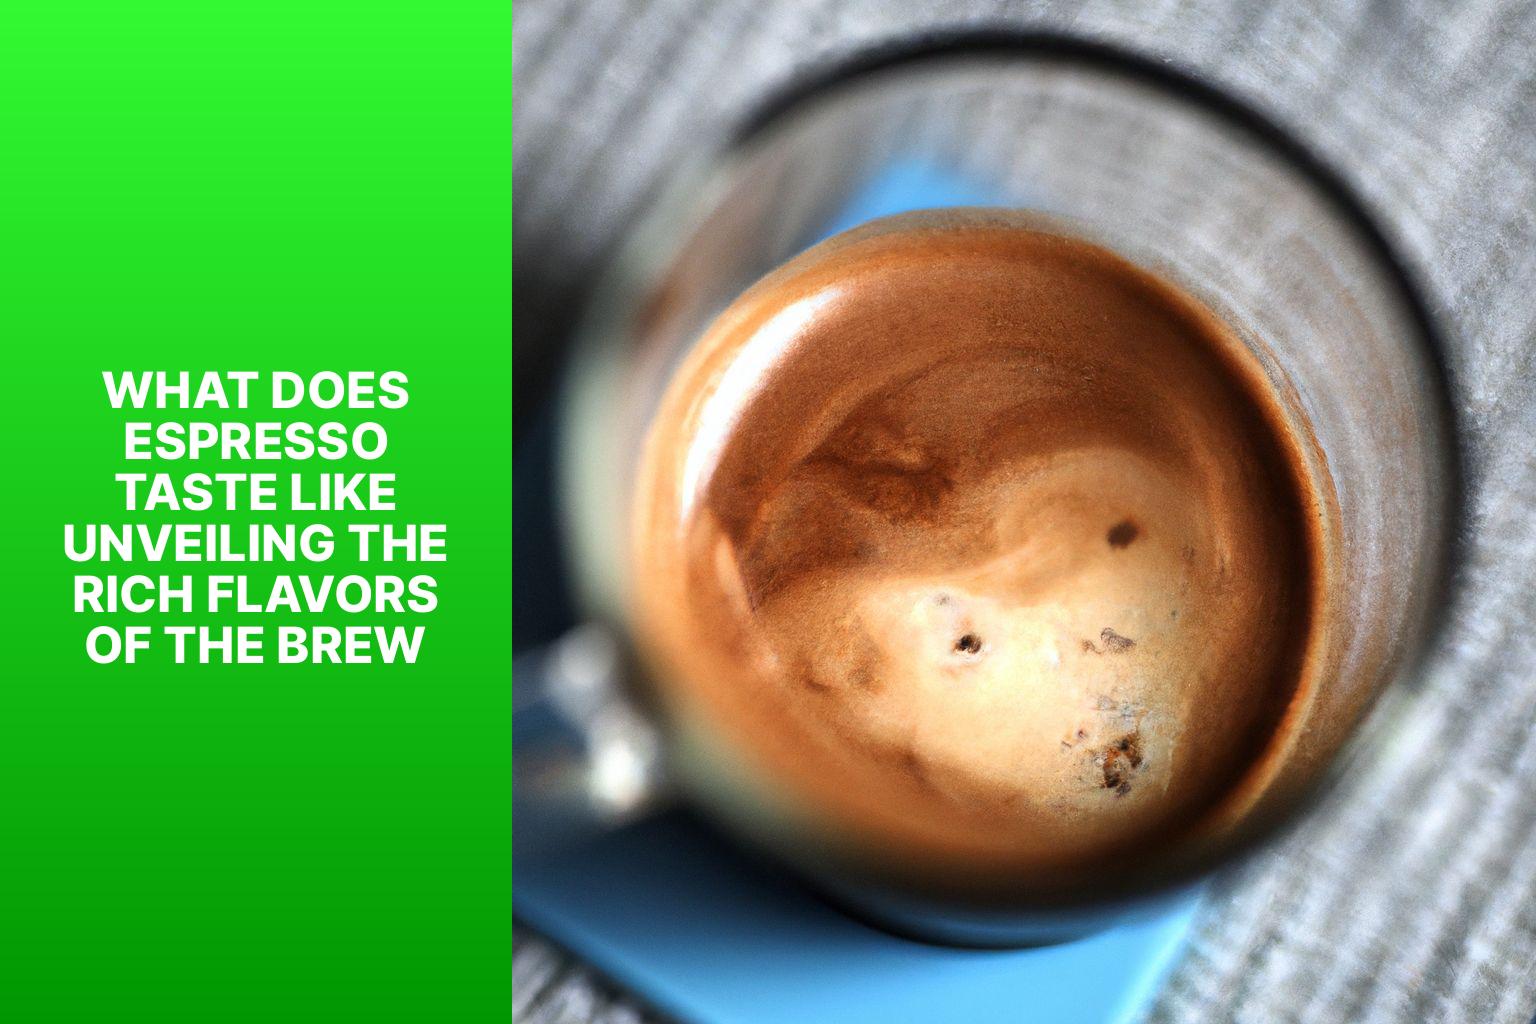 What Does Espresso Taste Like? Unveiling the Rich Flavors of the Brew